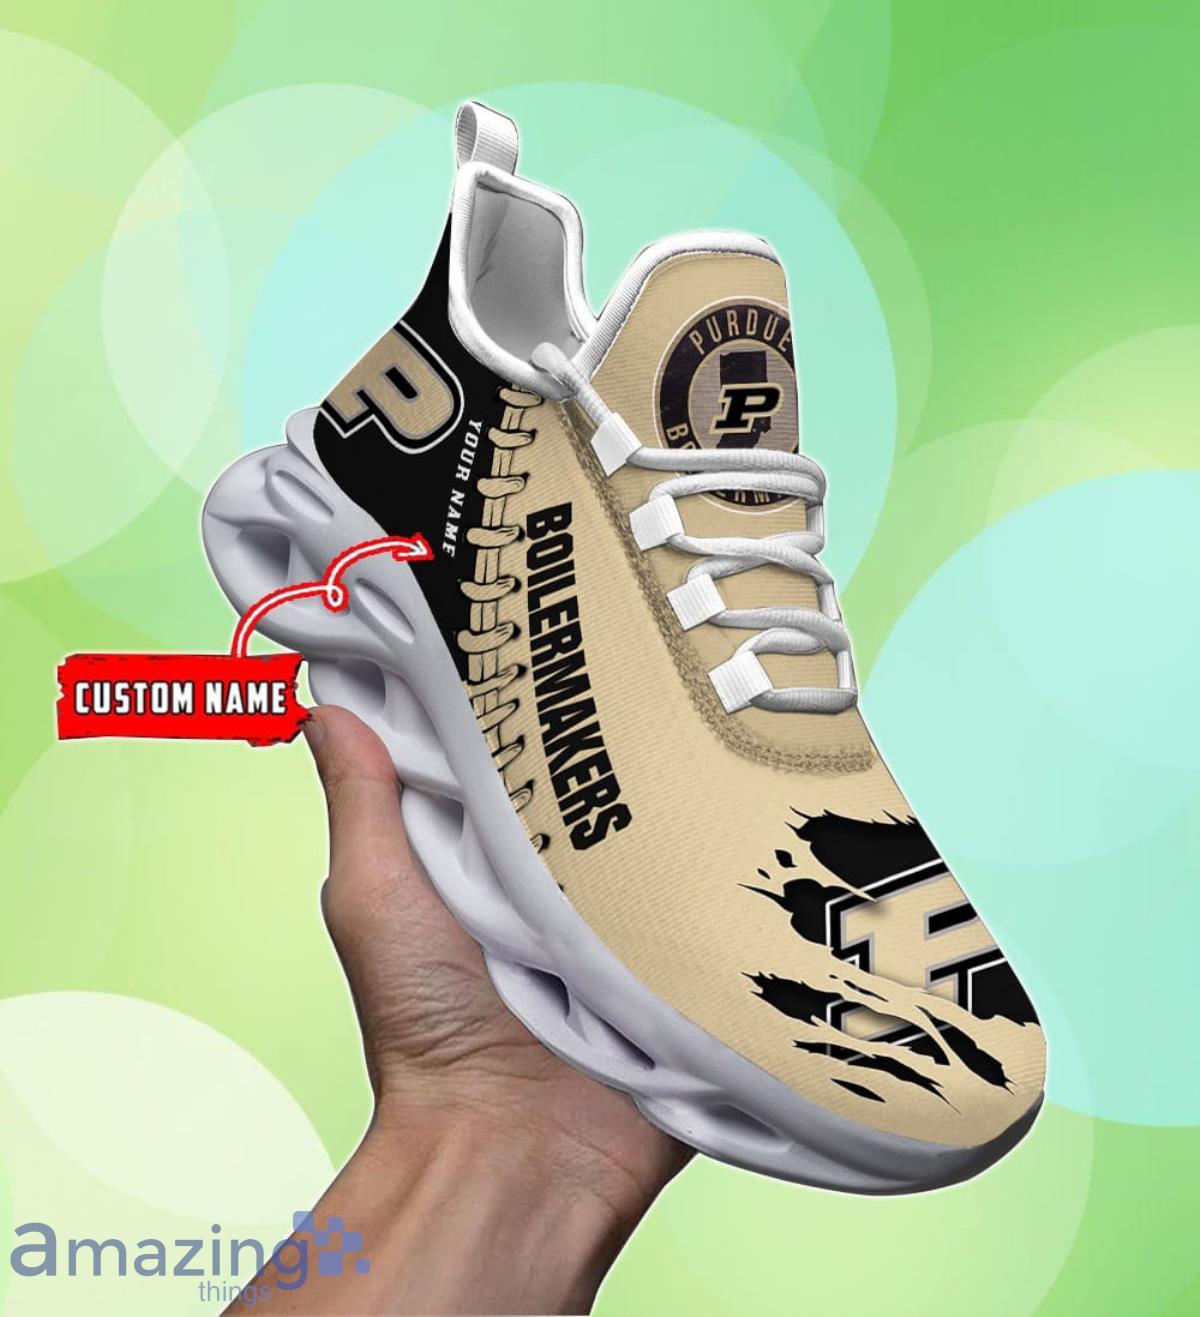 Purdue Boilermakers Personalized Max Soul Shoes Unique Gift For Men And Women Fans Product Photo 1